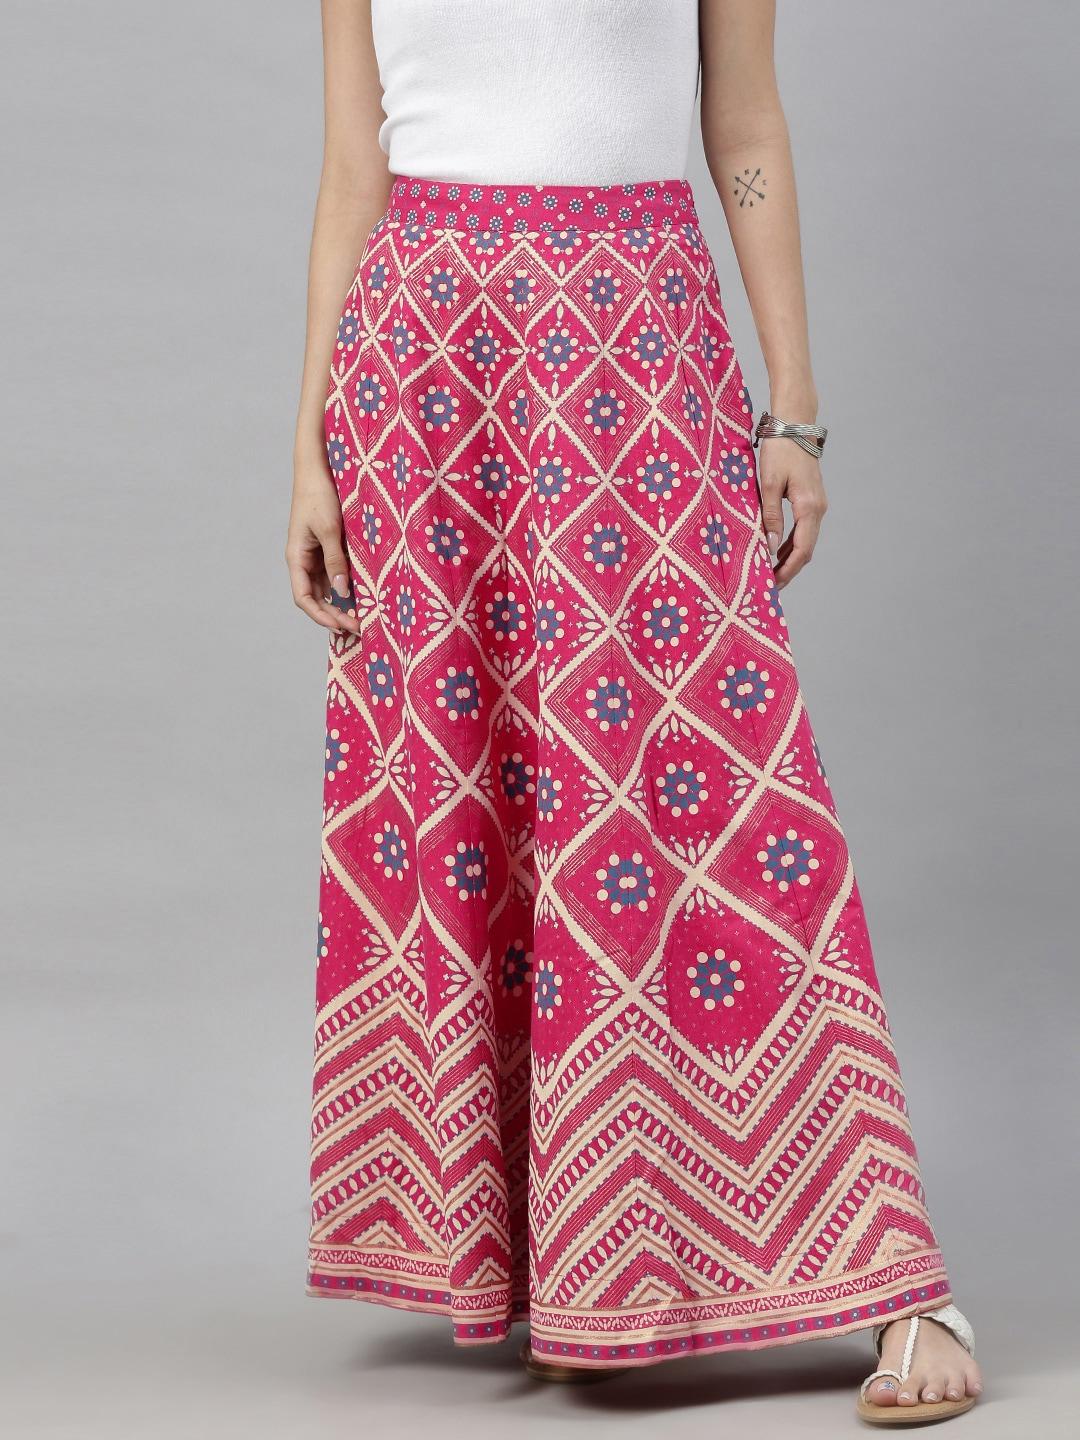 Global Desi Woman's Pink and Beige Floral Printed Skirt